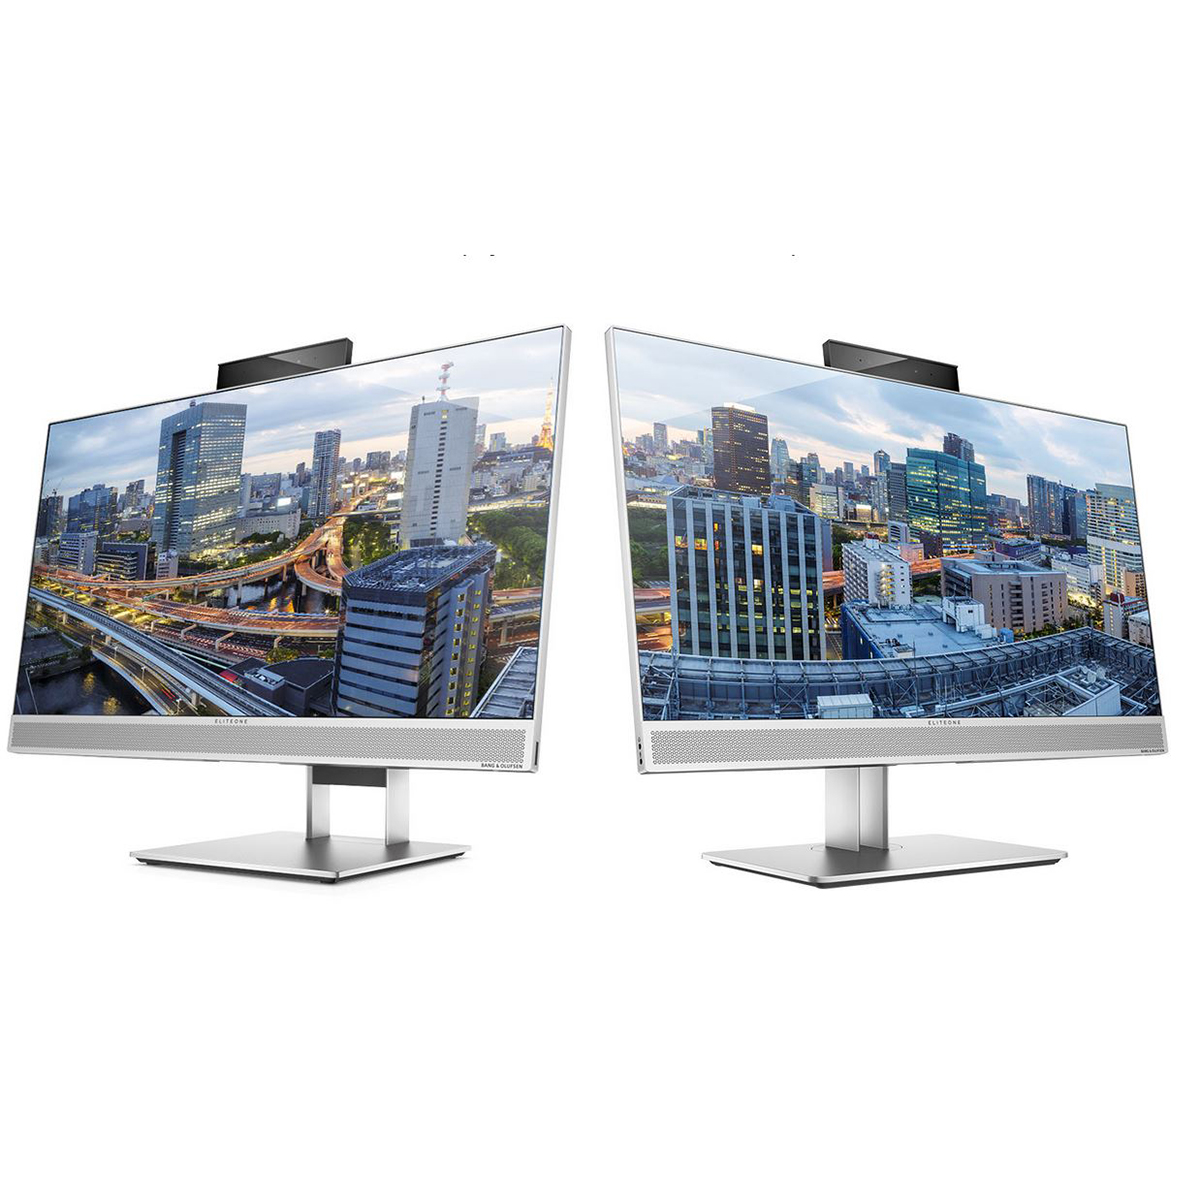 HP EliteOne 800 G3 - All-in-One - LED 23.8 Touch Screen